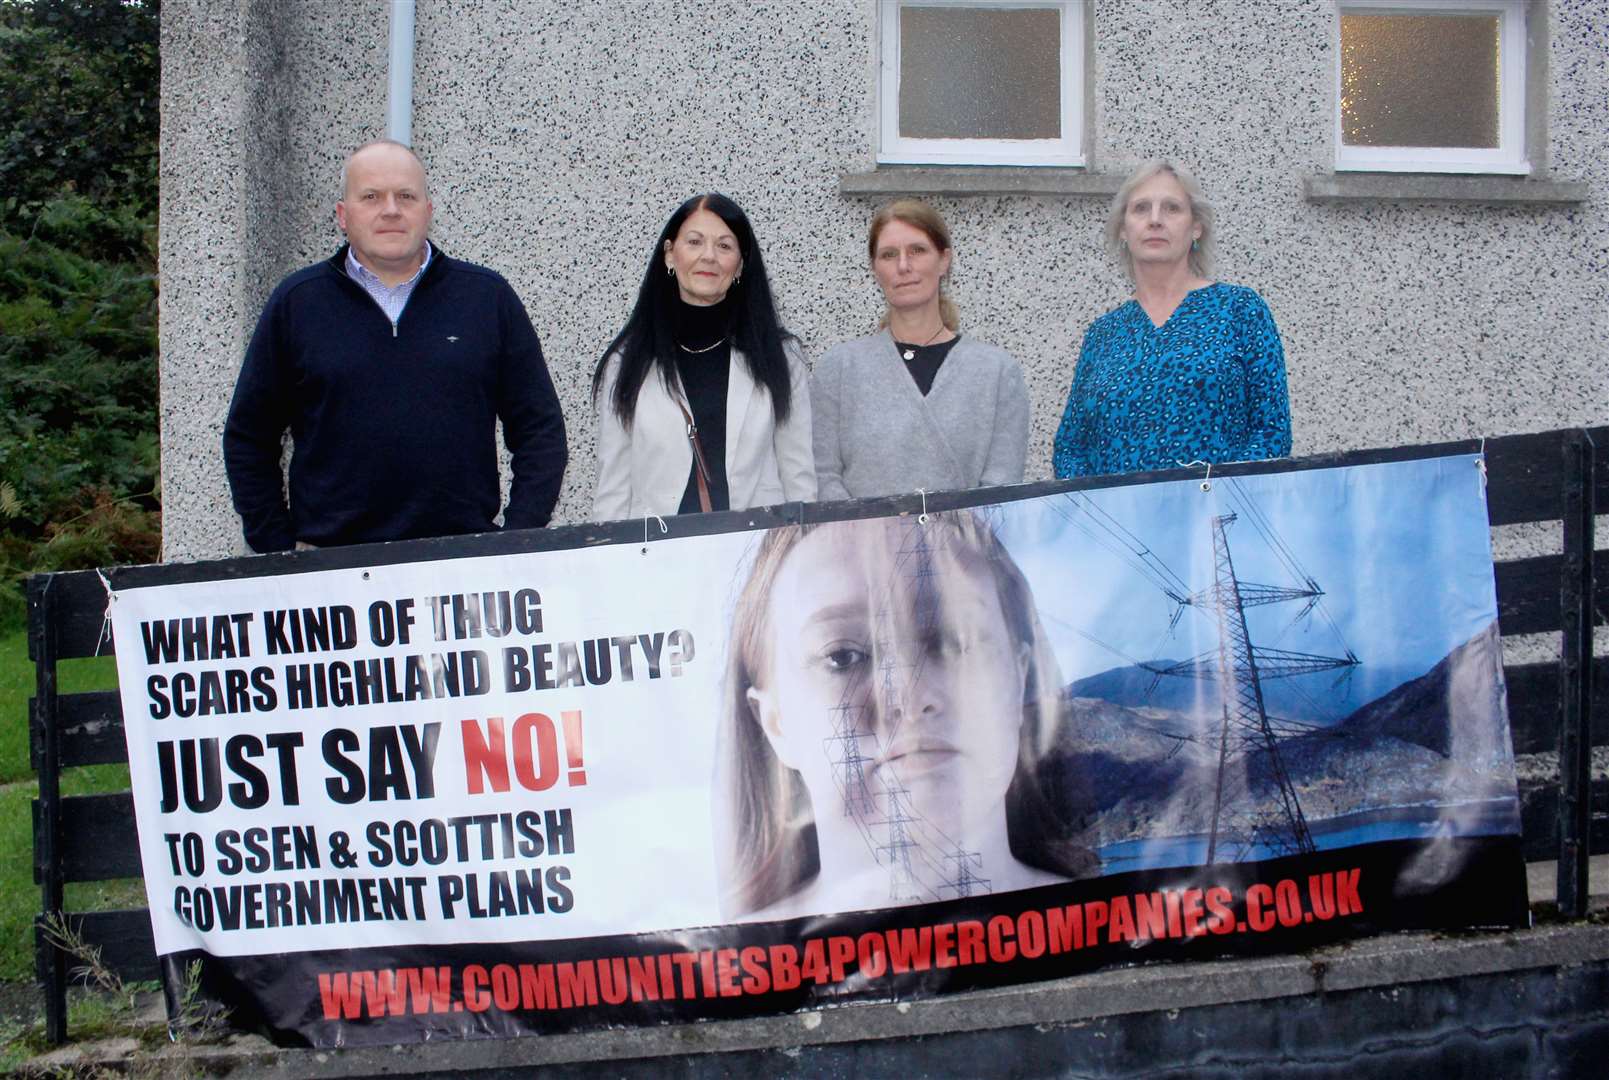 Outside the community hall in Dunbeath before Tuesday's public meeting are (from left) Angus MacInnes, chairman of Berriedale and Dunbeath Community Council, Lynn Parker, secretary of Dunbeath/Berriedale Community Say NO to Pylons, and Denise Davis and Lyndsey Ward from Communities B4 Power Companies.